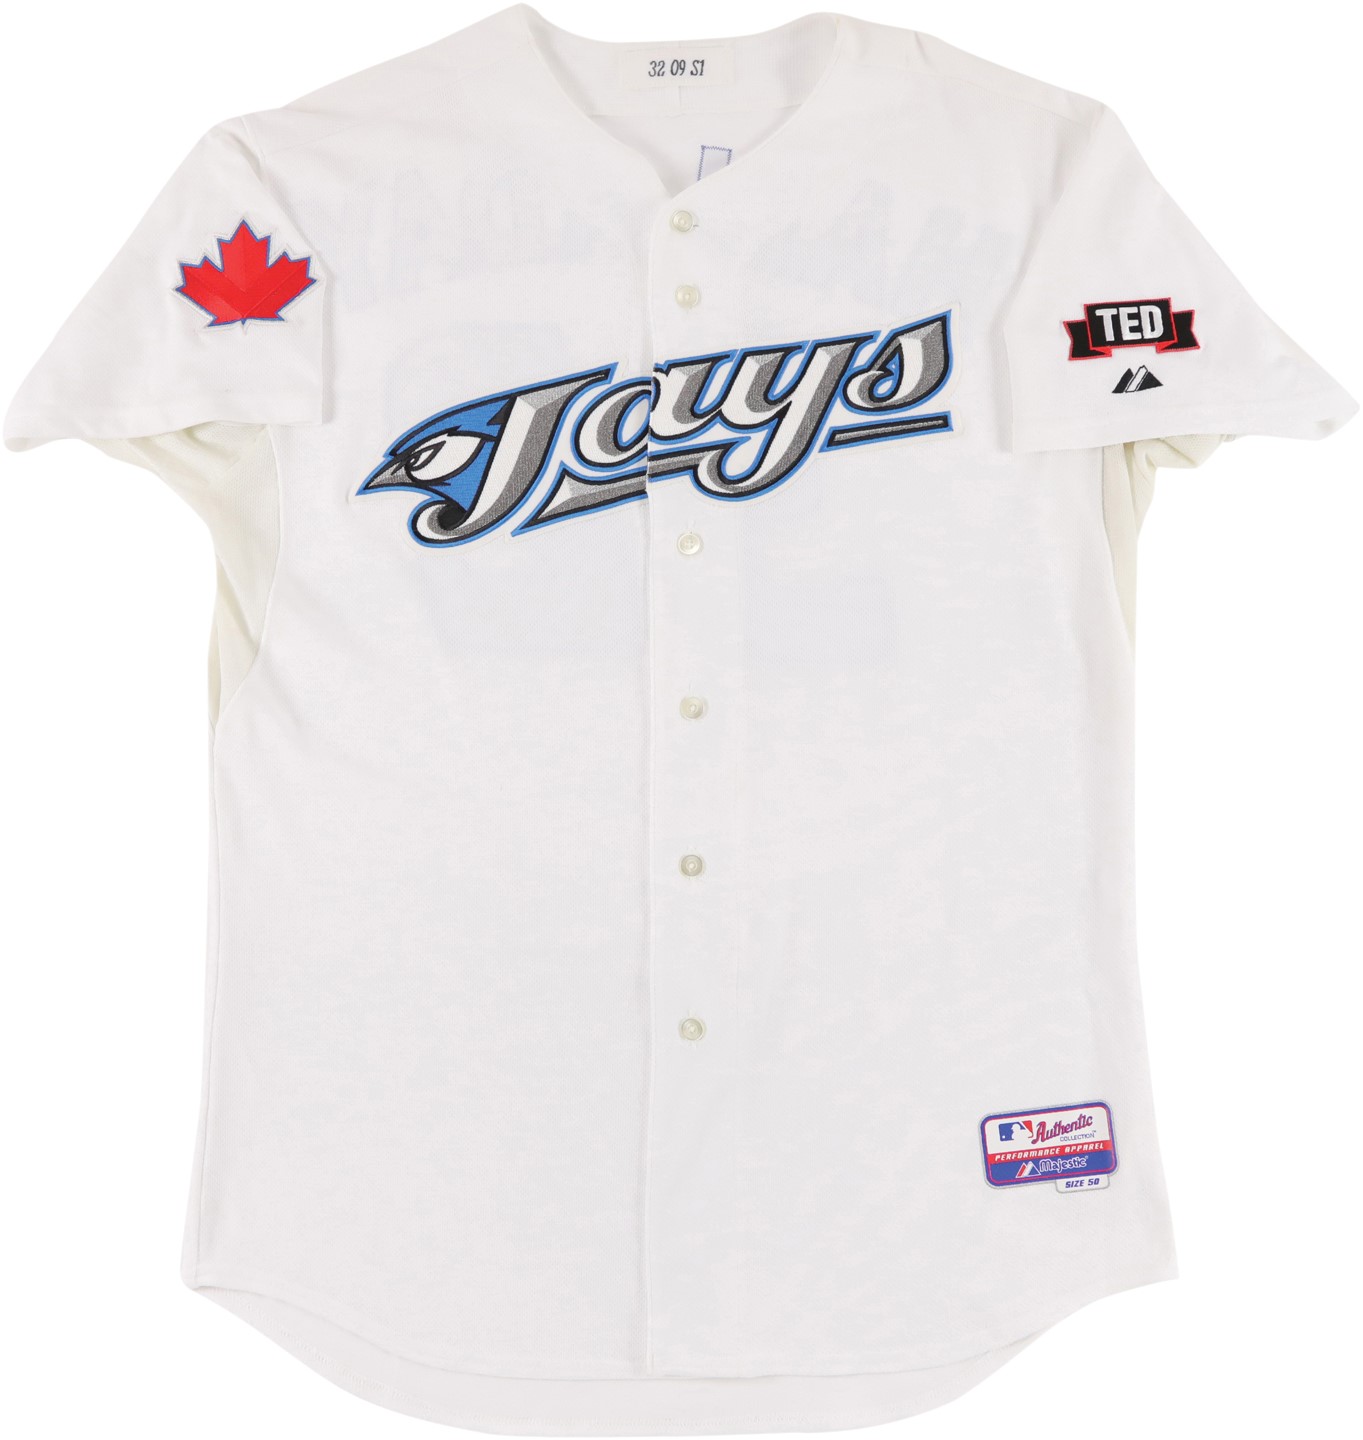 - 2009 Roy Halladay Opening Day Victory Toronto Blue Jays Game Worn Jersey (Photo-Matched)